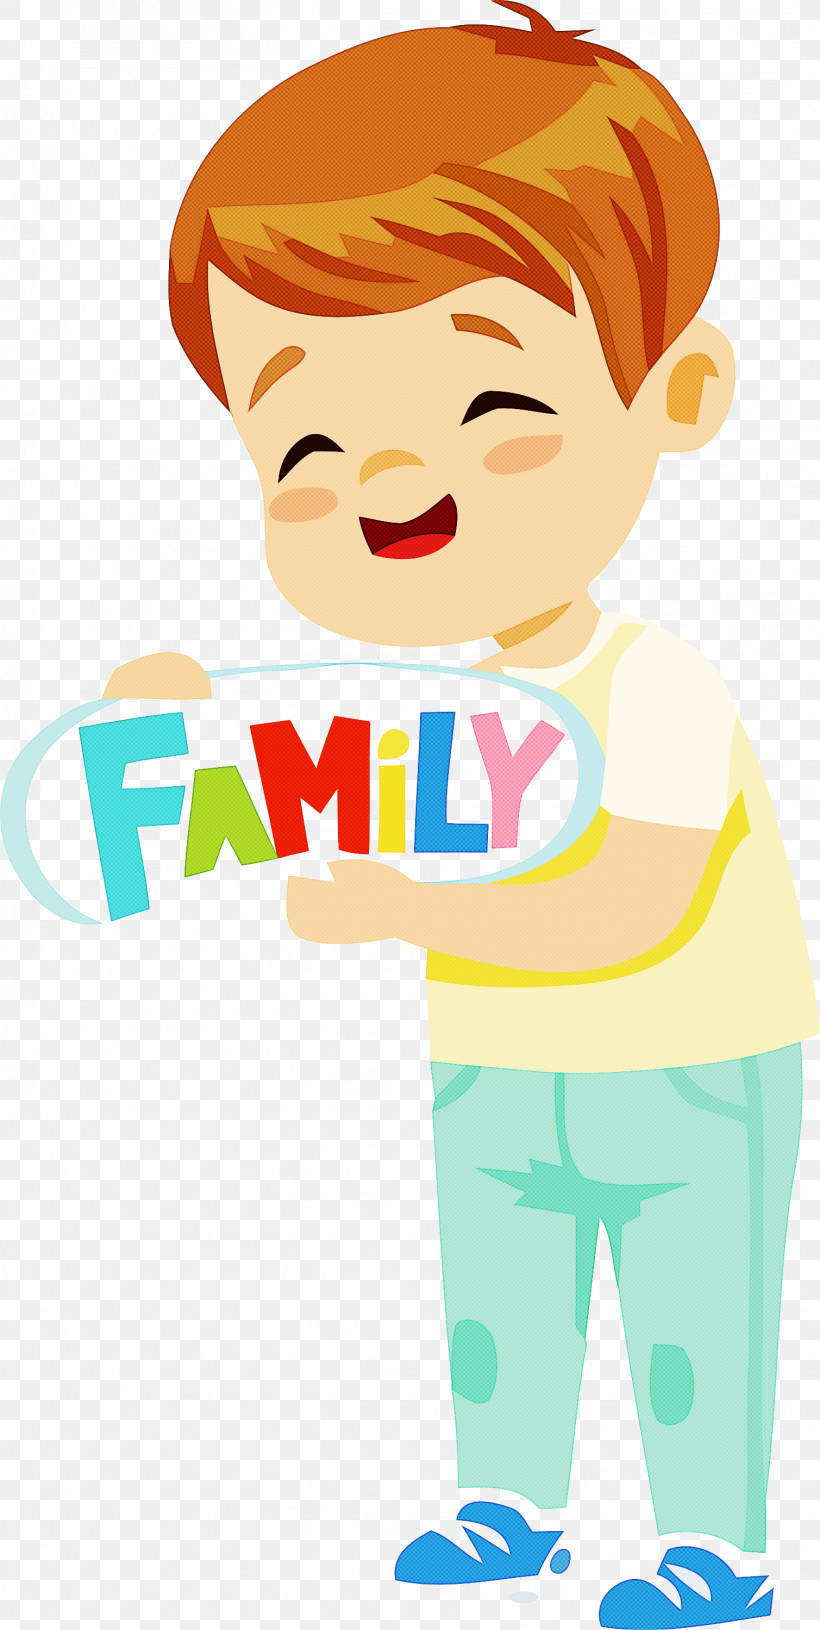 Cartoon Child Happy Toddler, PNG, 1509x3000px, Cartoon, Child, Happy, Toddler Download Free